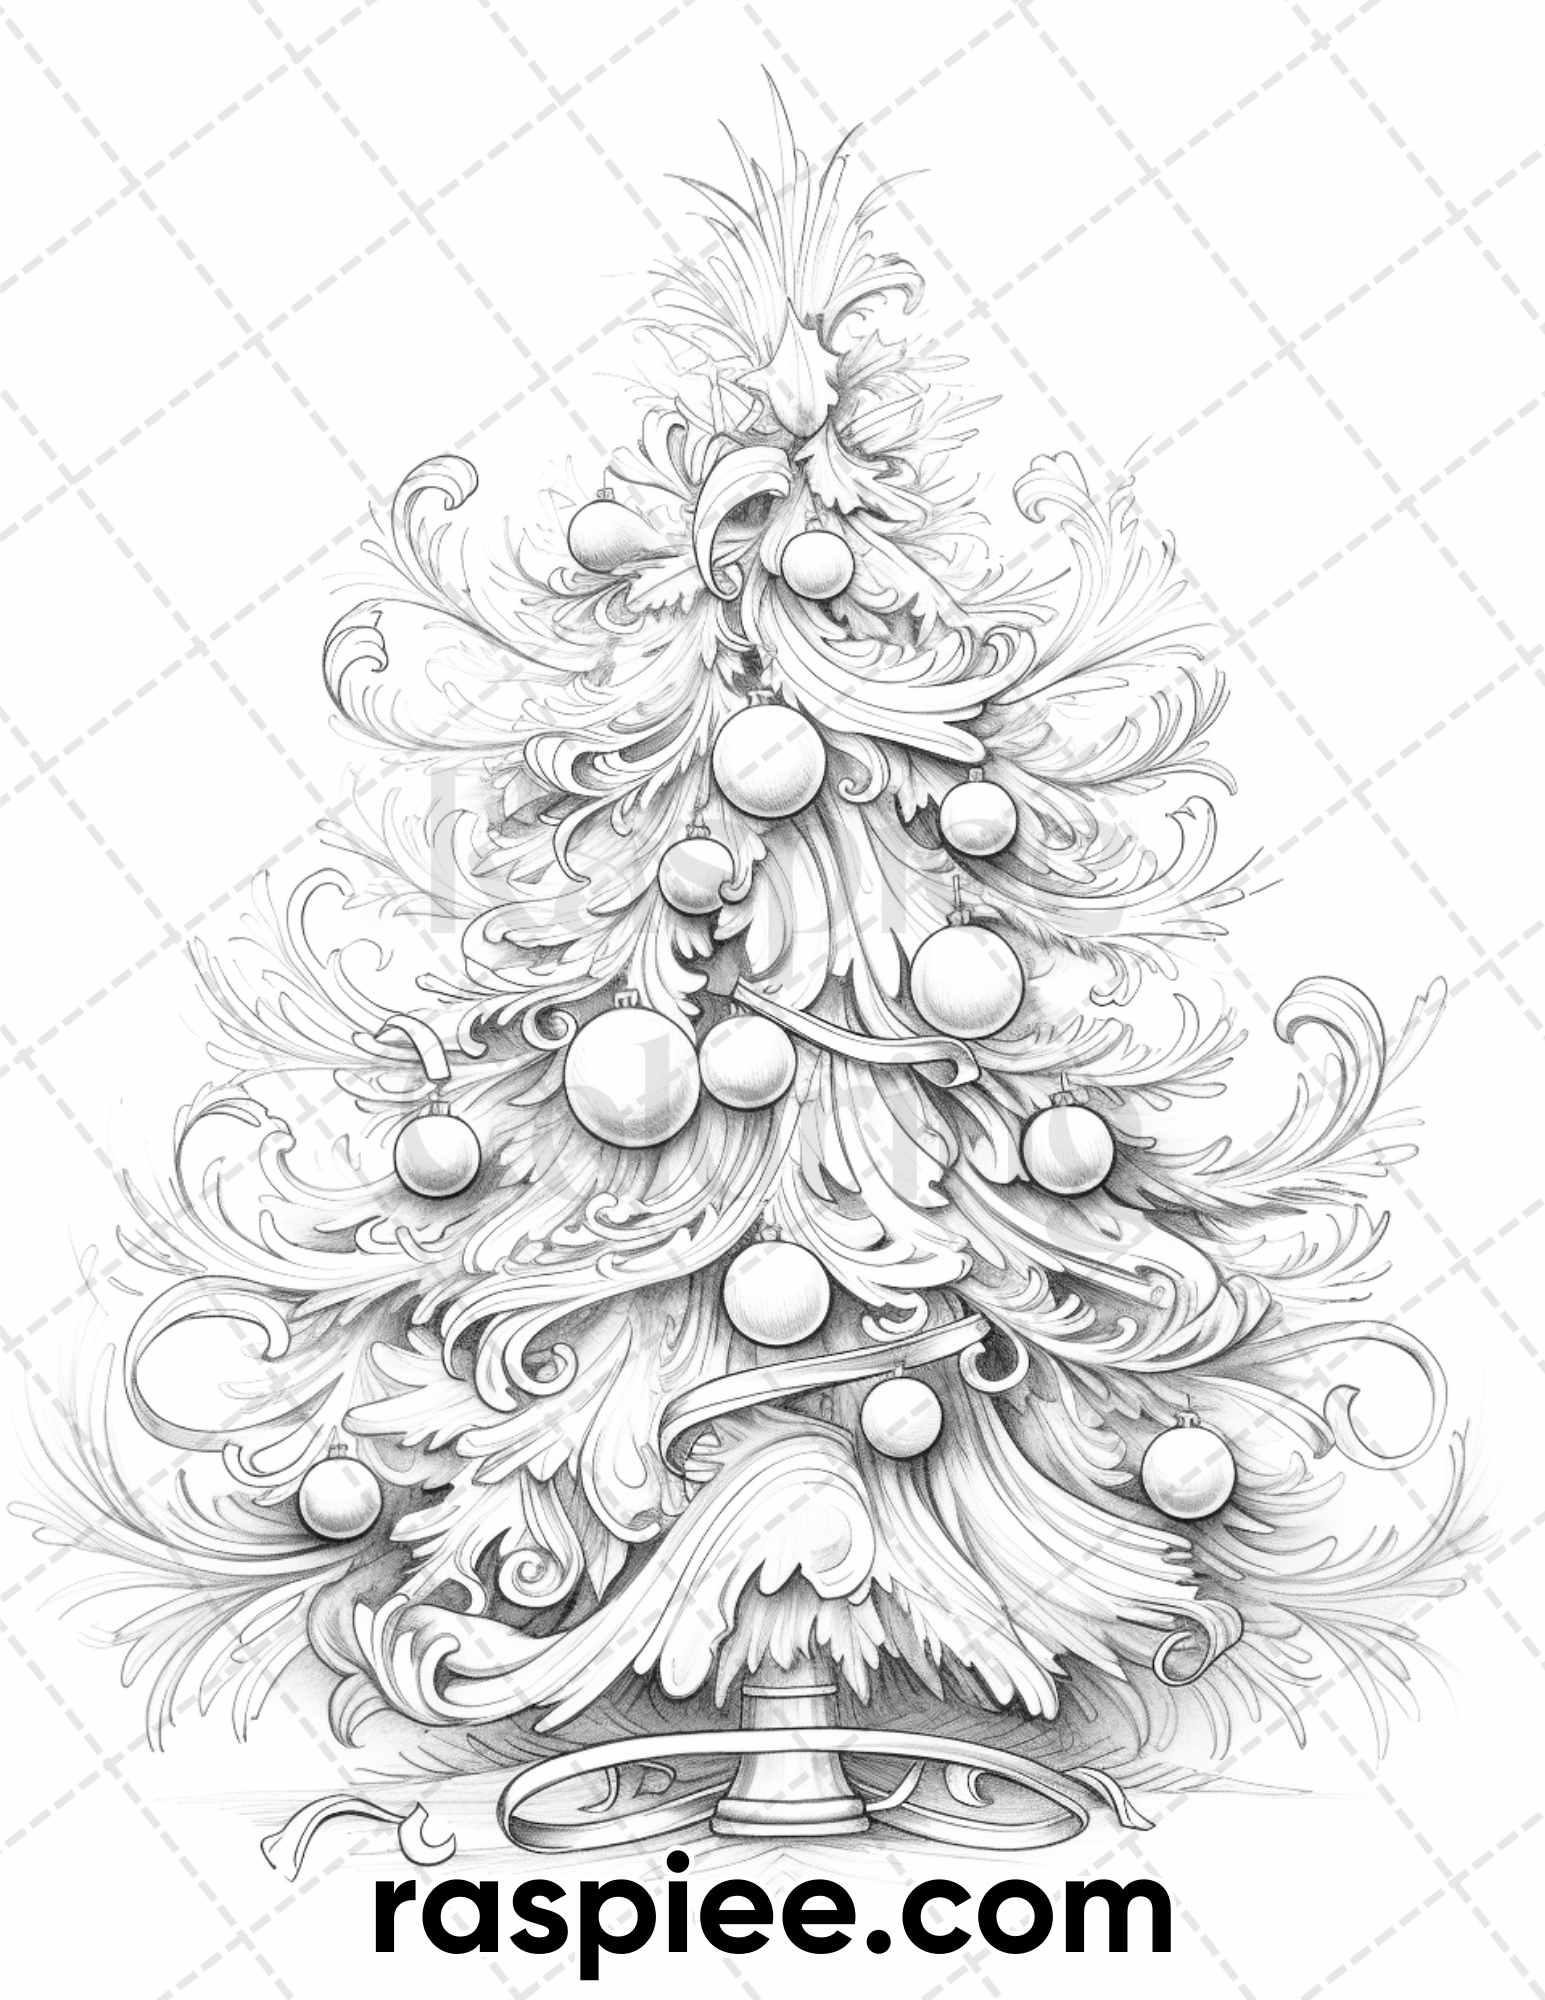 Christmas Tree Coloring Page, Christmas Coloring Pages for Adults, Christmas Coloring Book Printable, Christmas Coloring Sheets, Xmas Coloring Pages, Holiday Coloring Pages, Winter Coloring Pages, Plants Coloring Pages